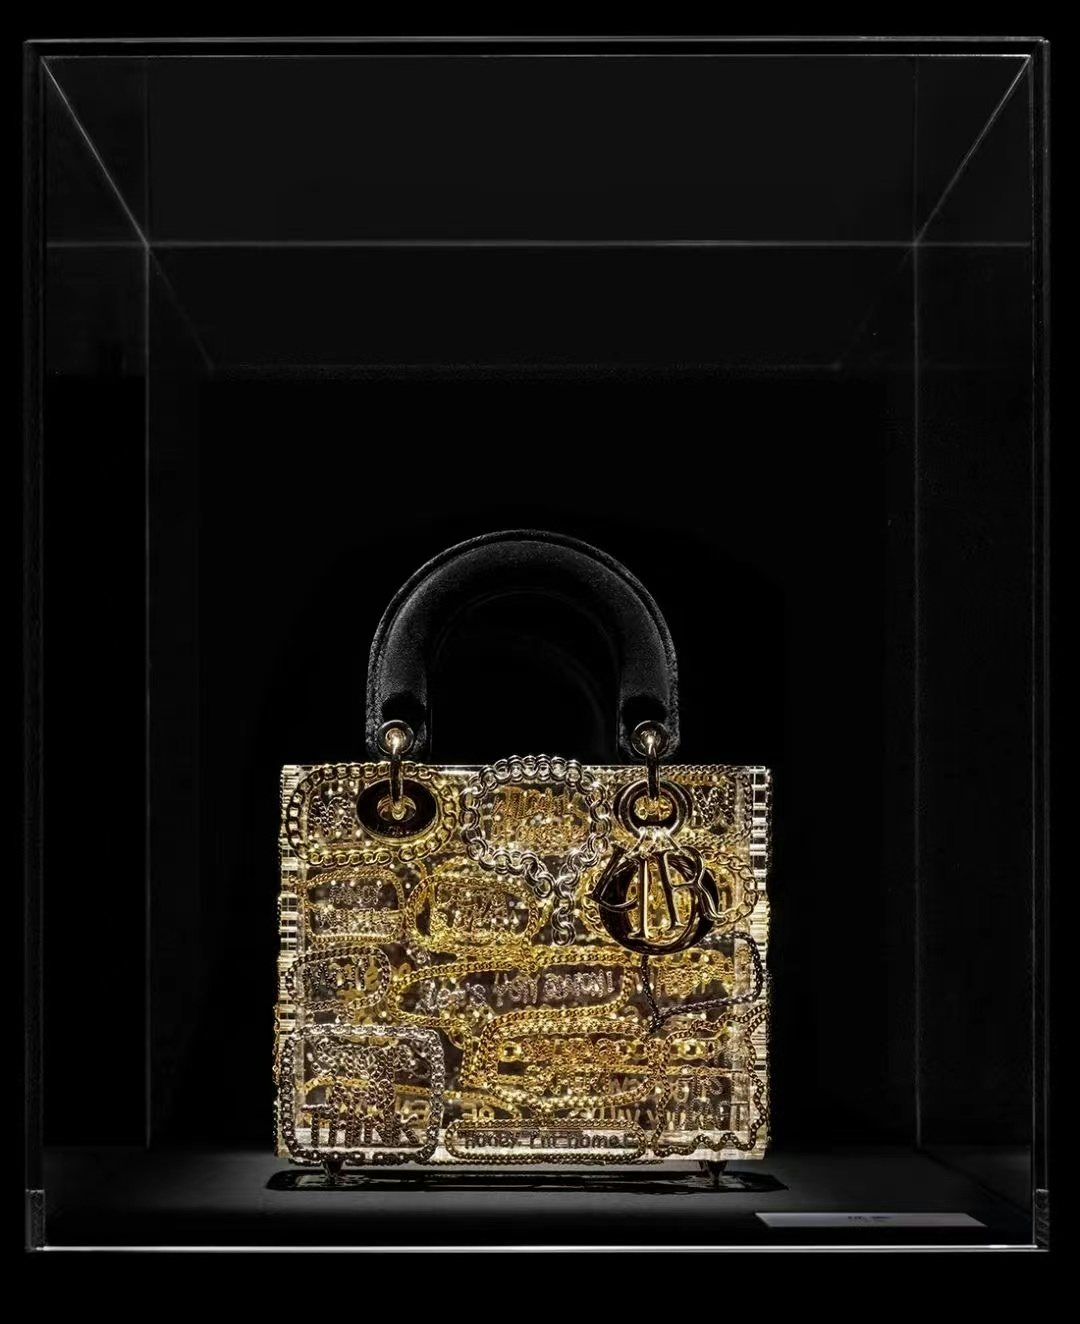 Chinese artist Xu Zhen reinvented the Lady Dior handbag as part of the Dior Lady Art #8 project. Photo: Dior
